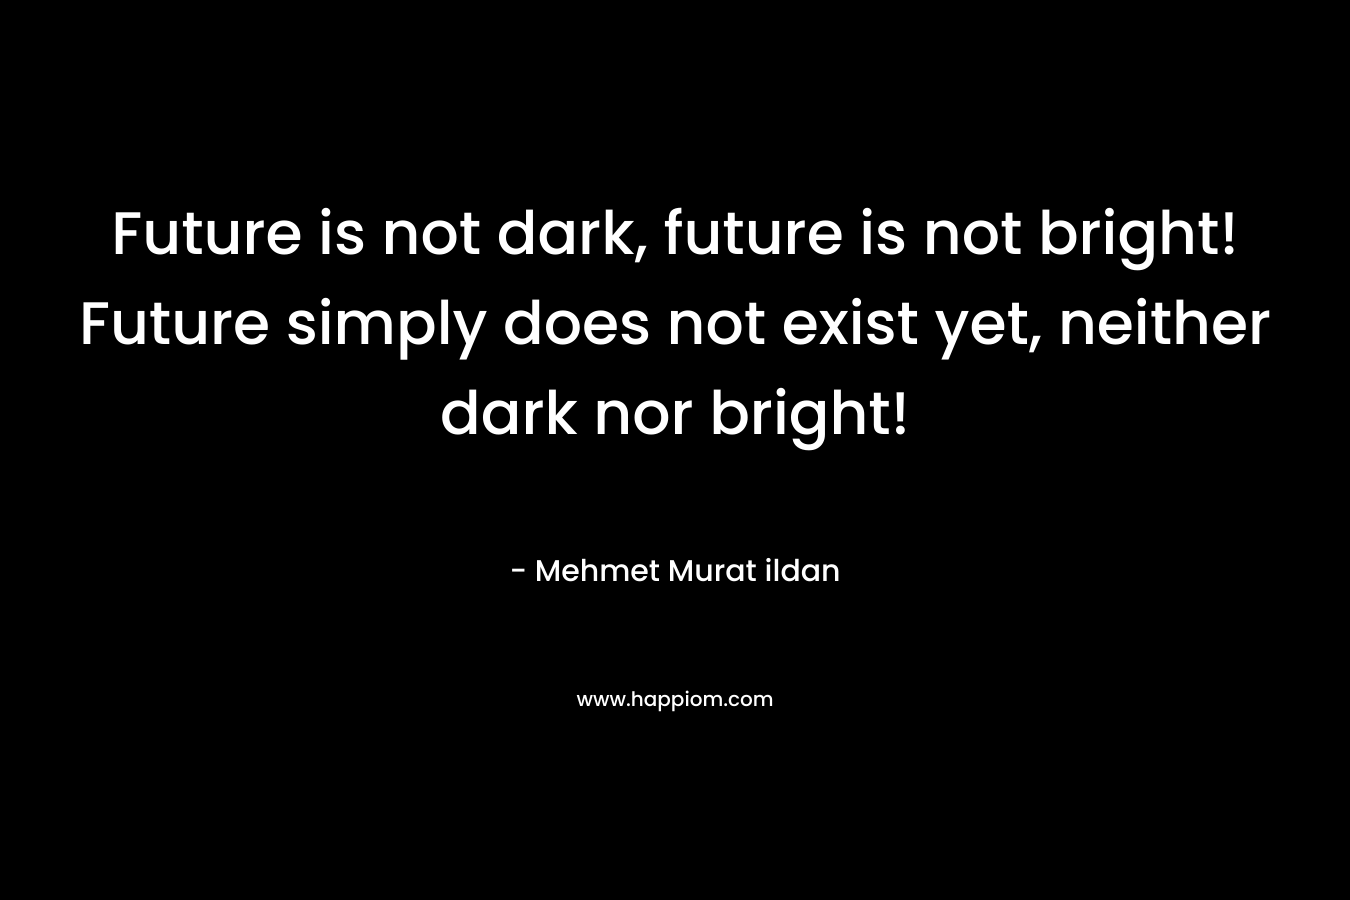 Future is not dark, future is not bright! Future simply does not exist yet, neither dark nor bright!